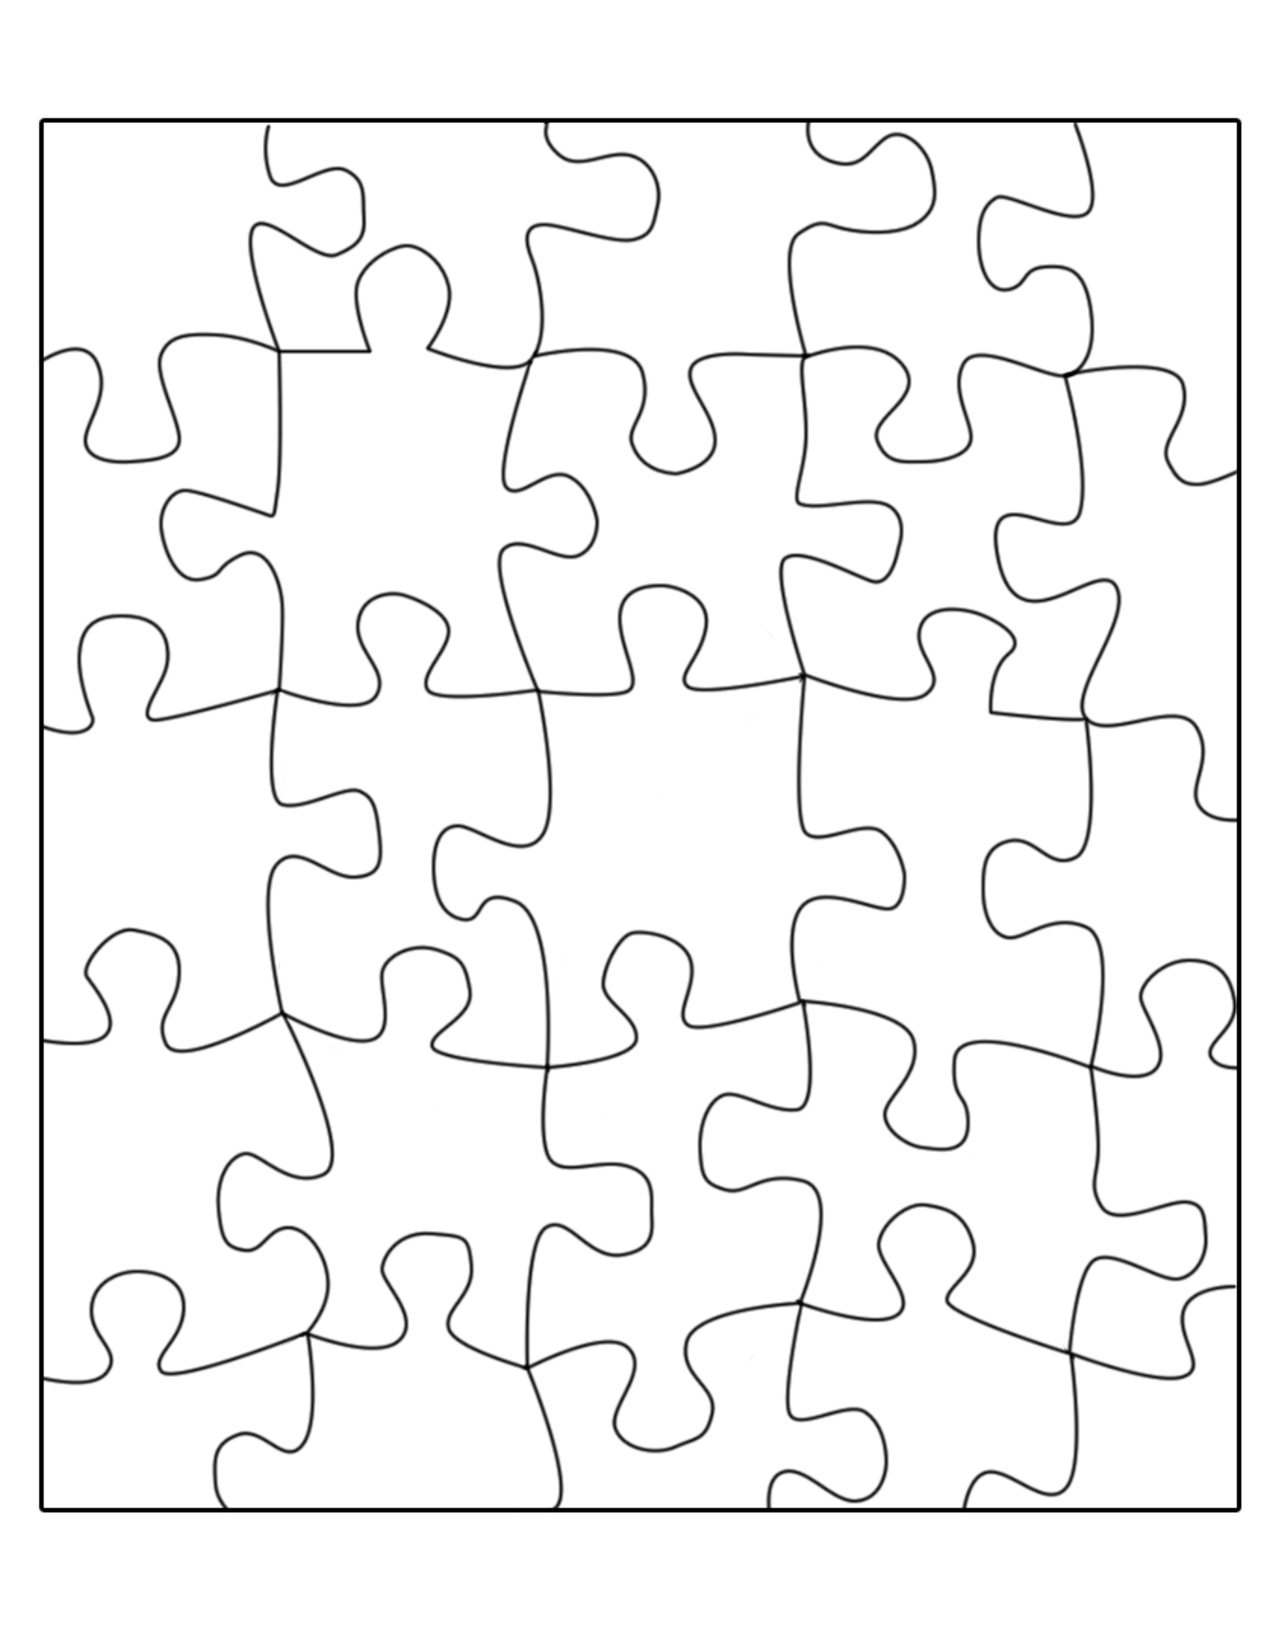 Free Puzzle Template, Download Free Clip Art, Free Clip Art On - Printable Jigsaw Puzzle Pieces